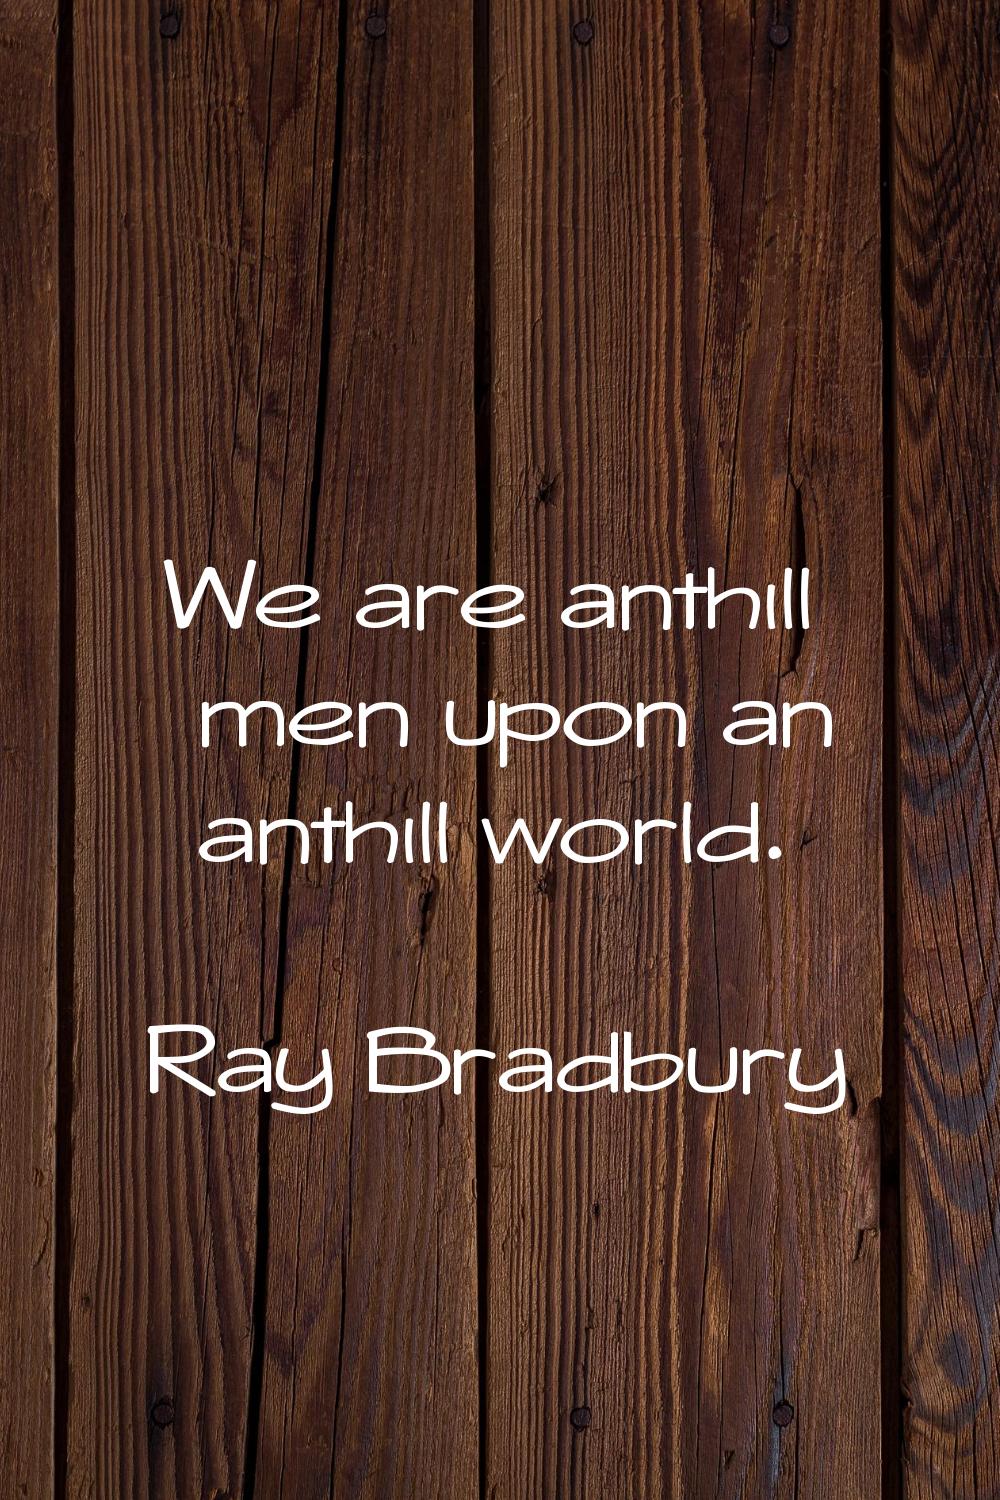 We are anthill men upon an anthill world.